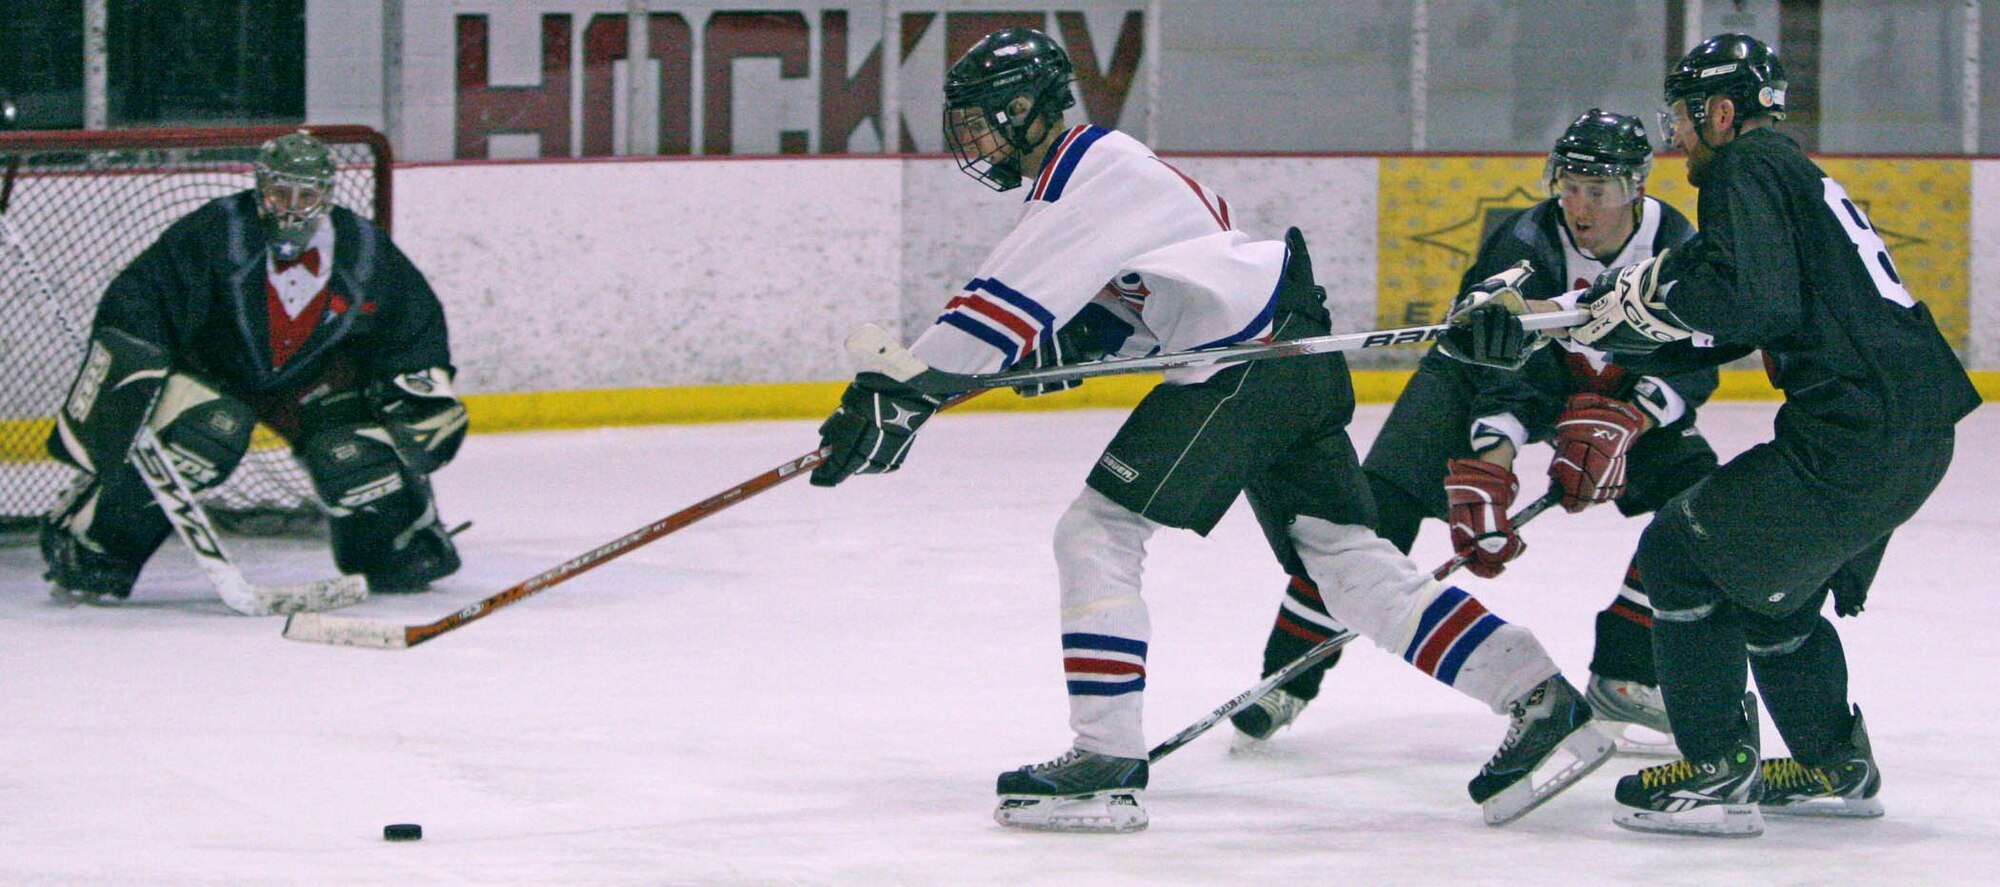 Nordiques forward Bryson Harley speeds through two Party Boys defenders March 7 on his drive toward the goal. Harley scored a goal in Sunday’s game but the Party Boys bested Tinker 8-5 in the end. (Air Force photo by John Stuart)
